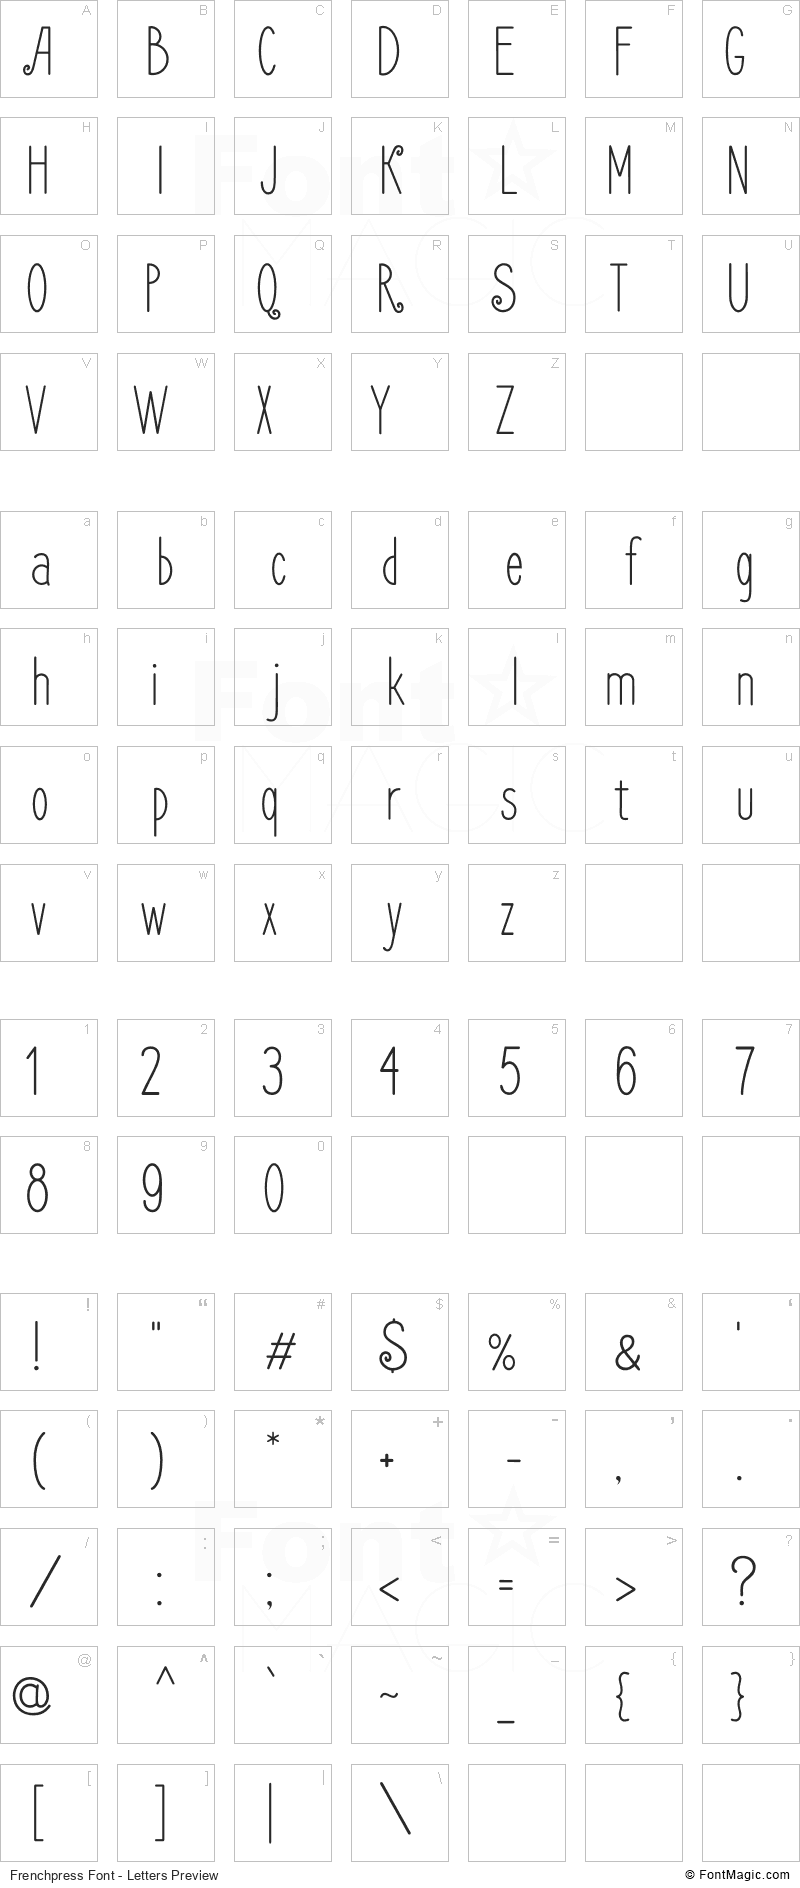 Frenchpress Font - All Latters Preview Chart